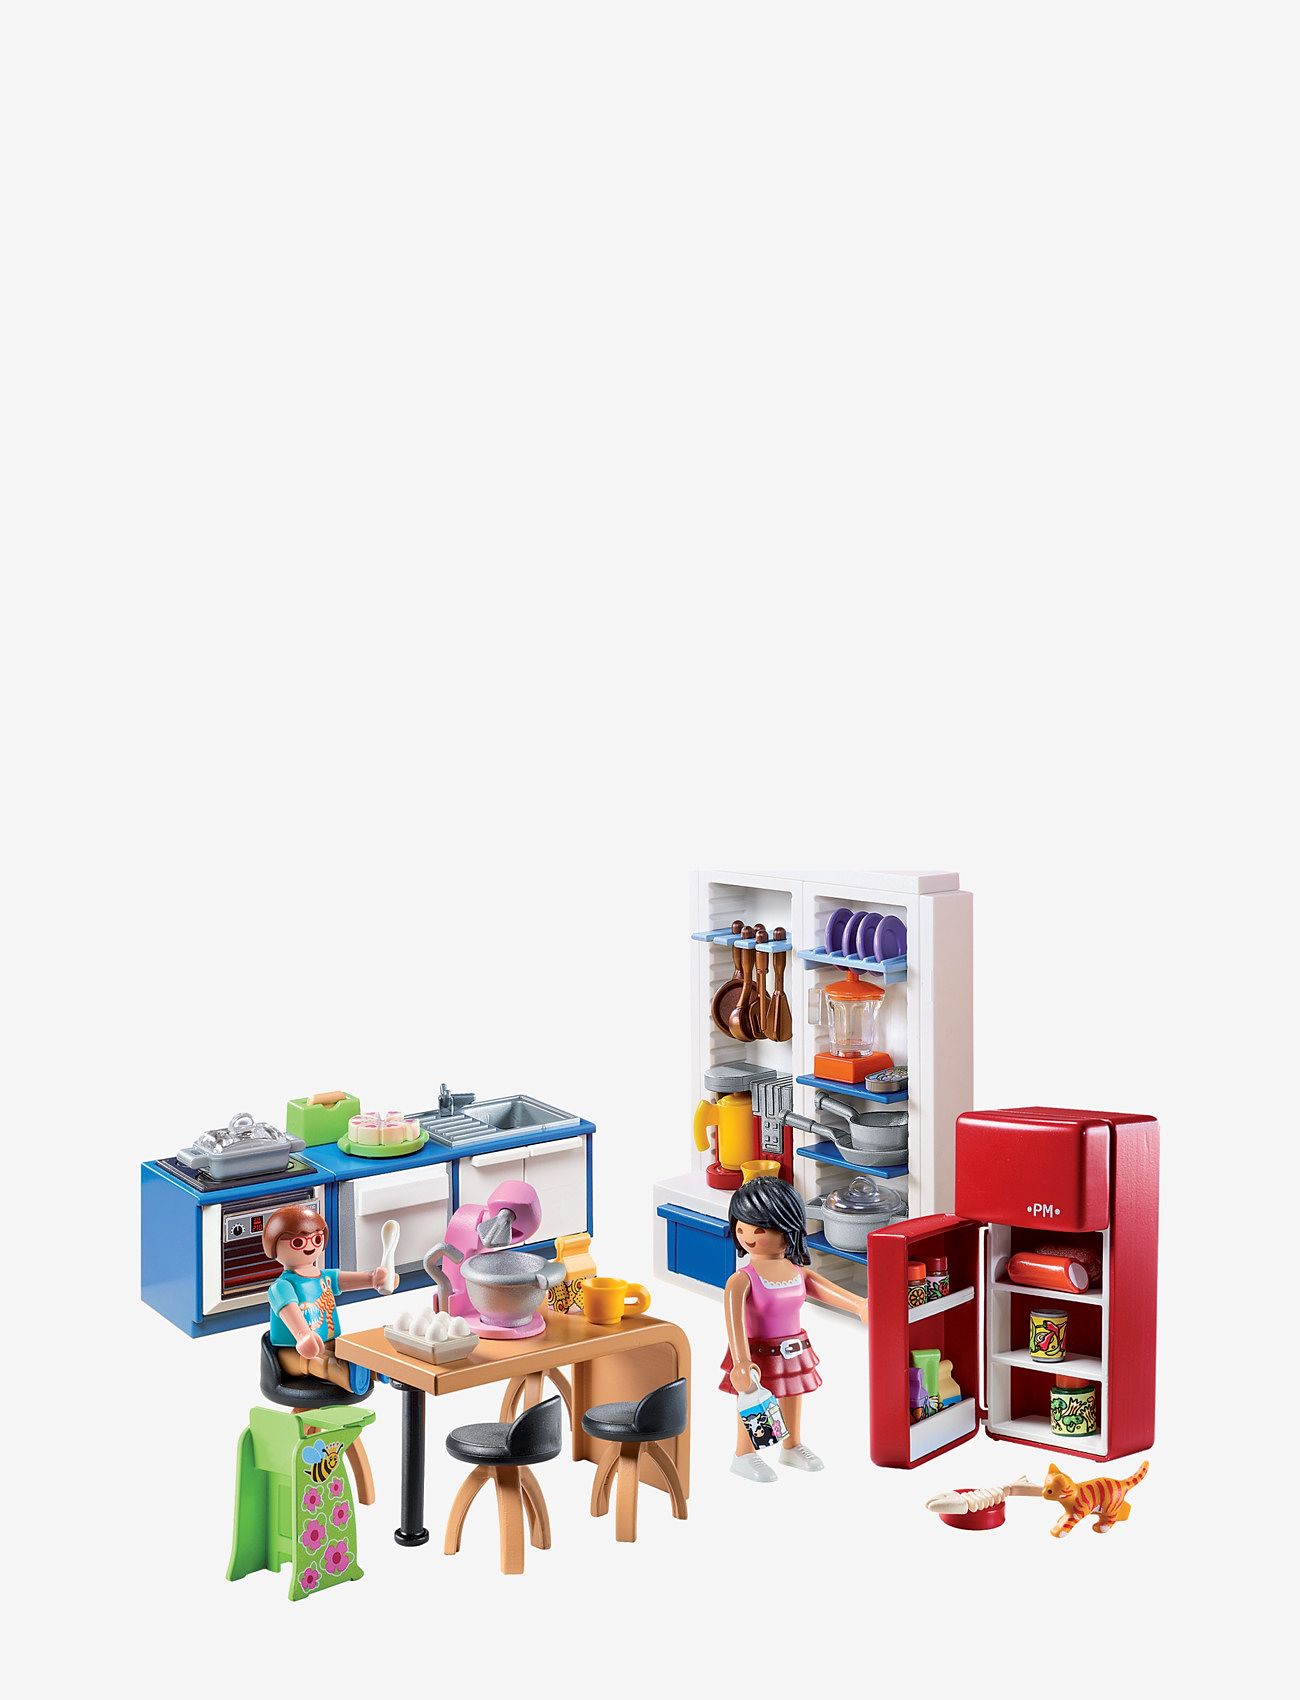 PLAYMOBIL - PLAYMOBIL Dollhouse Family Kitchen - 70206 - lowest prices - multicolored - 1